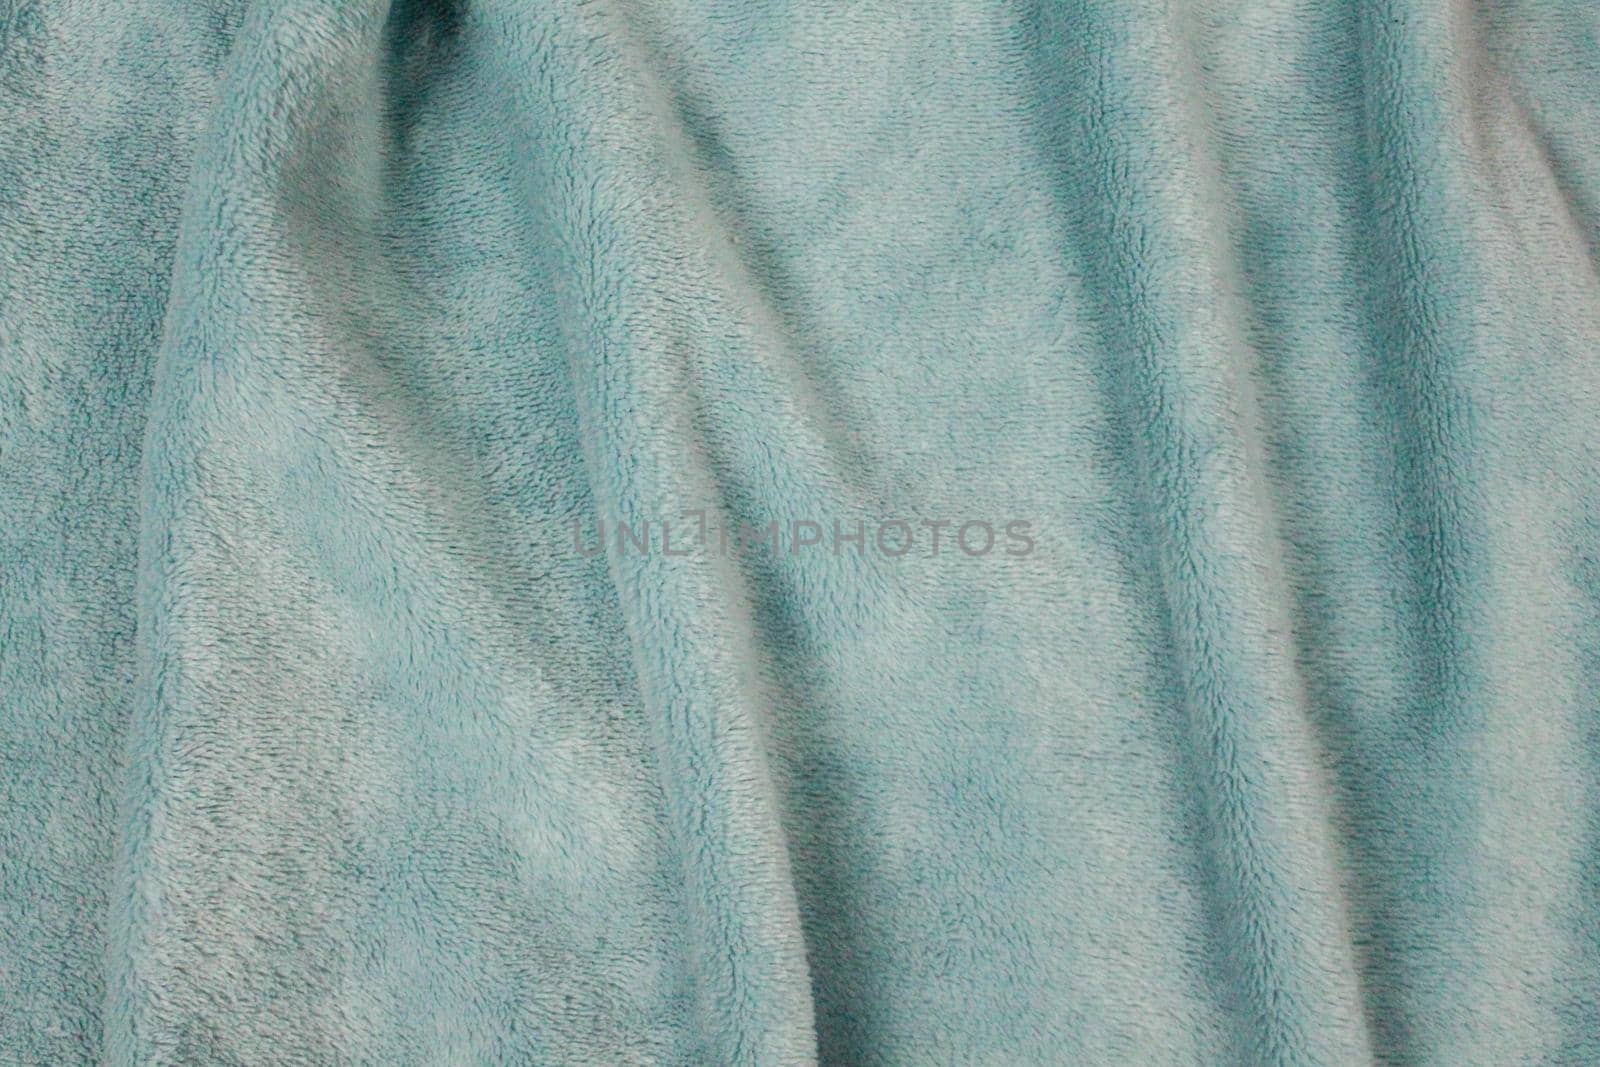 Plush cute blanket wavy texture. Light blue with shadows waves.